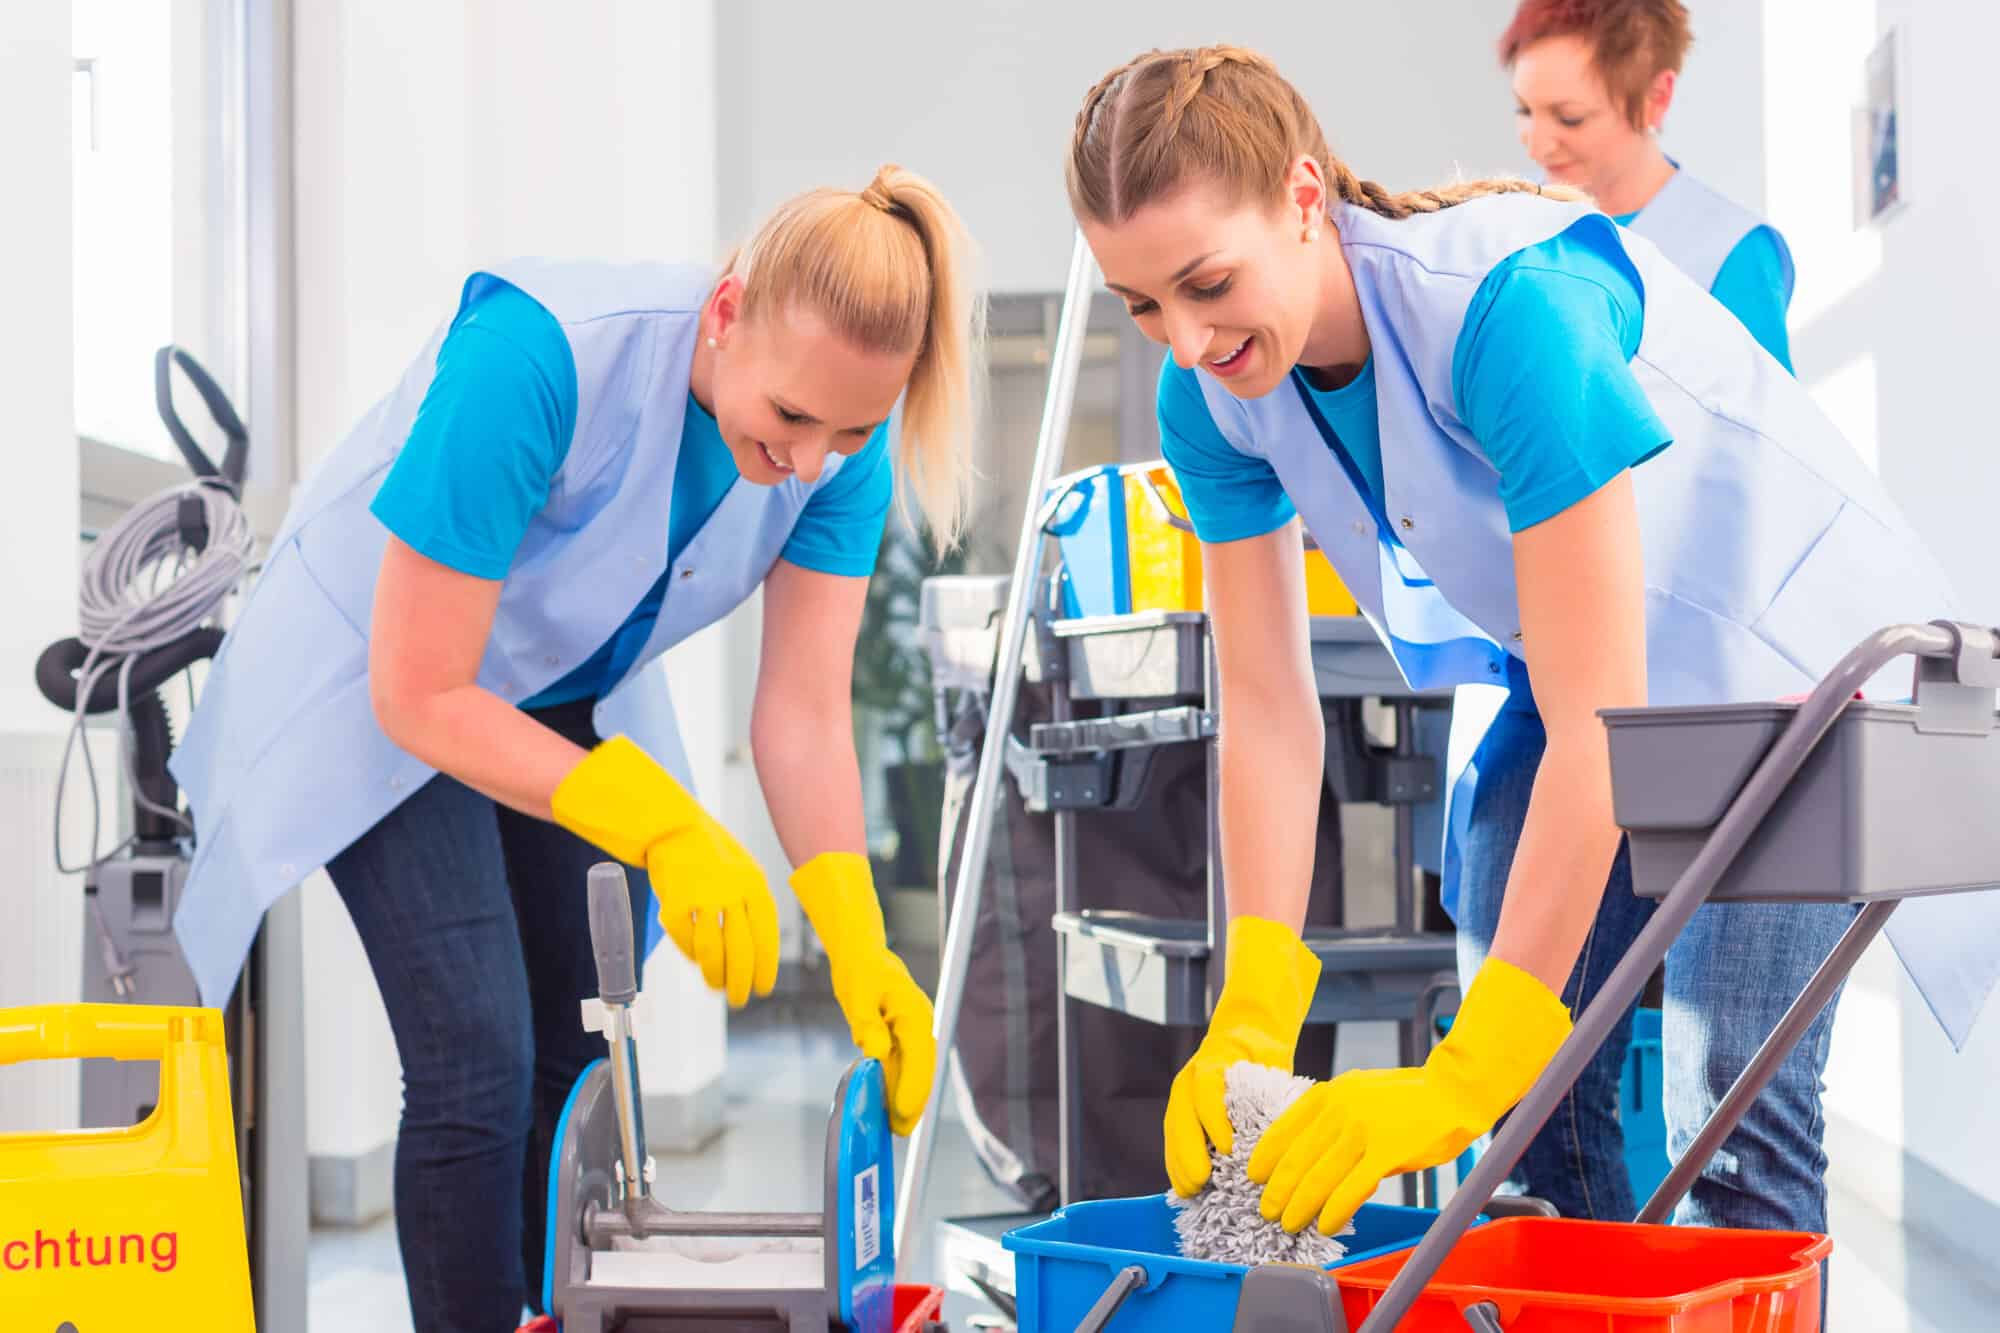 Three female professional cleaners working together.